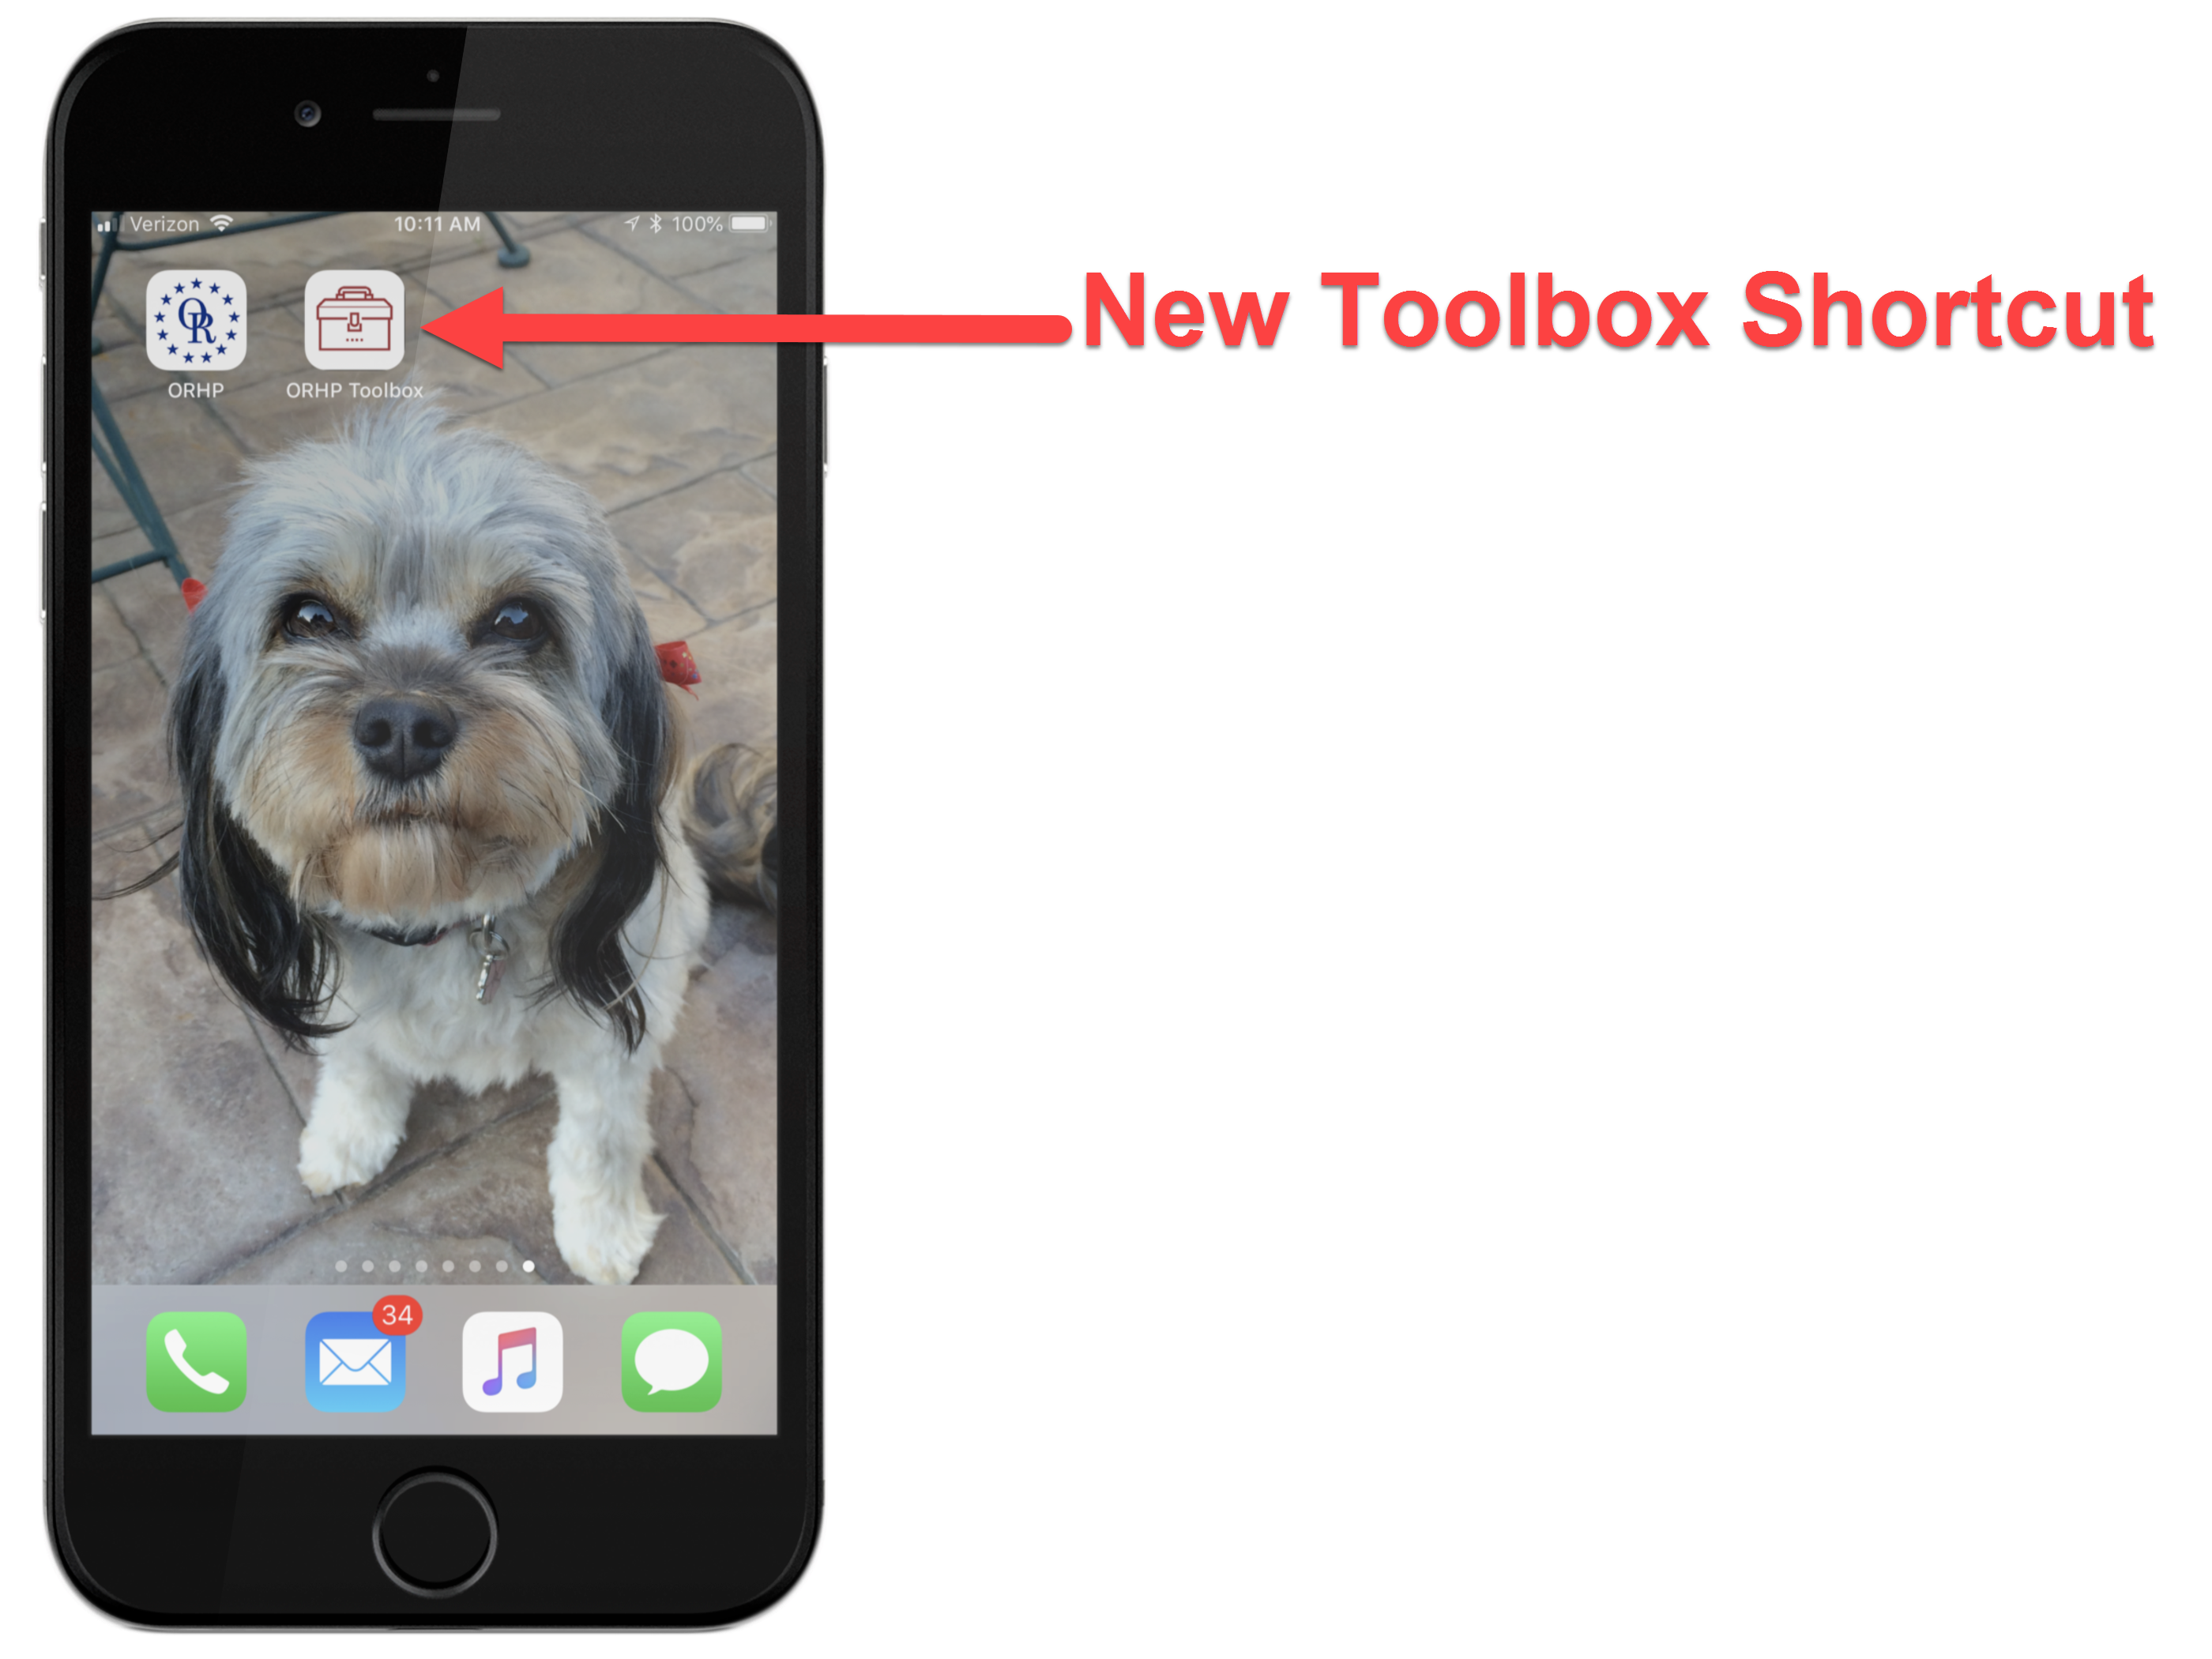 A view of website shortcuts on an iPhone with cute dog in the background wallpaper.